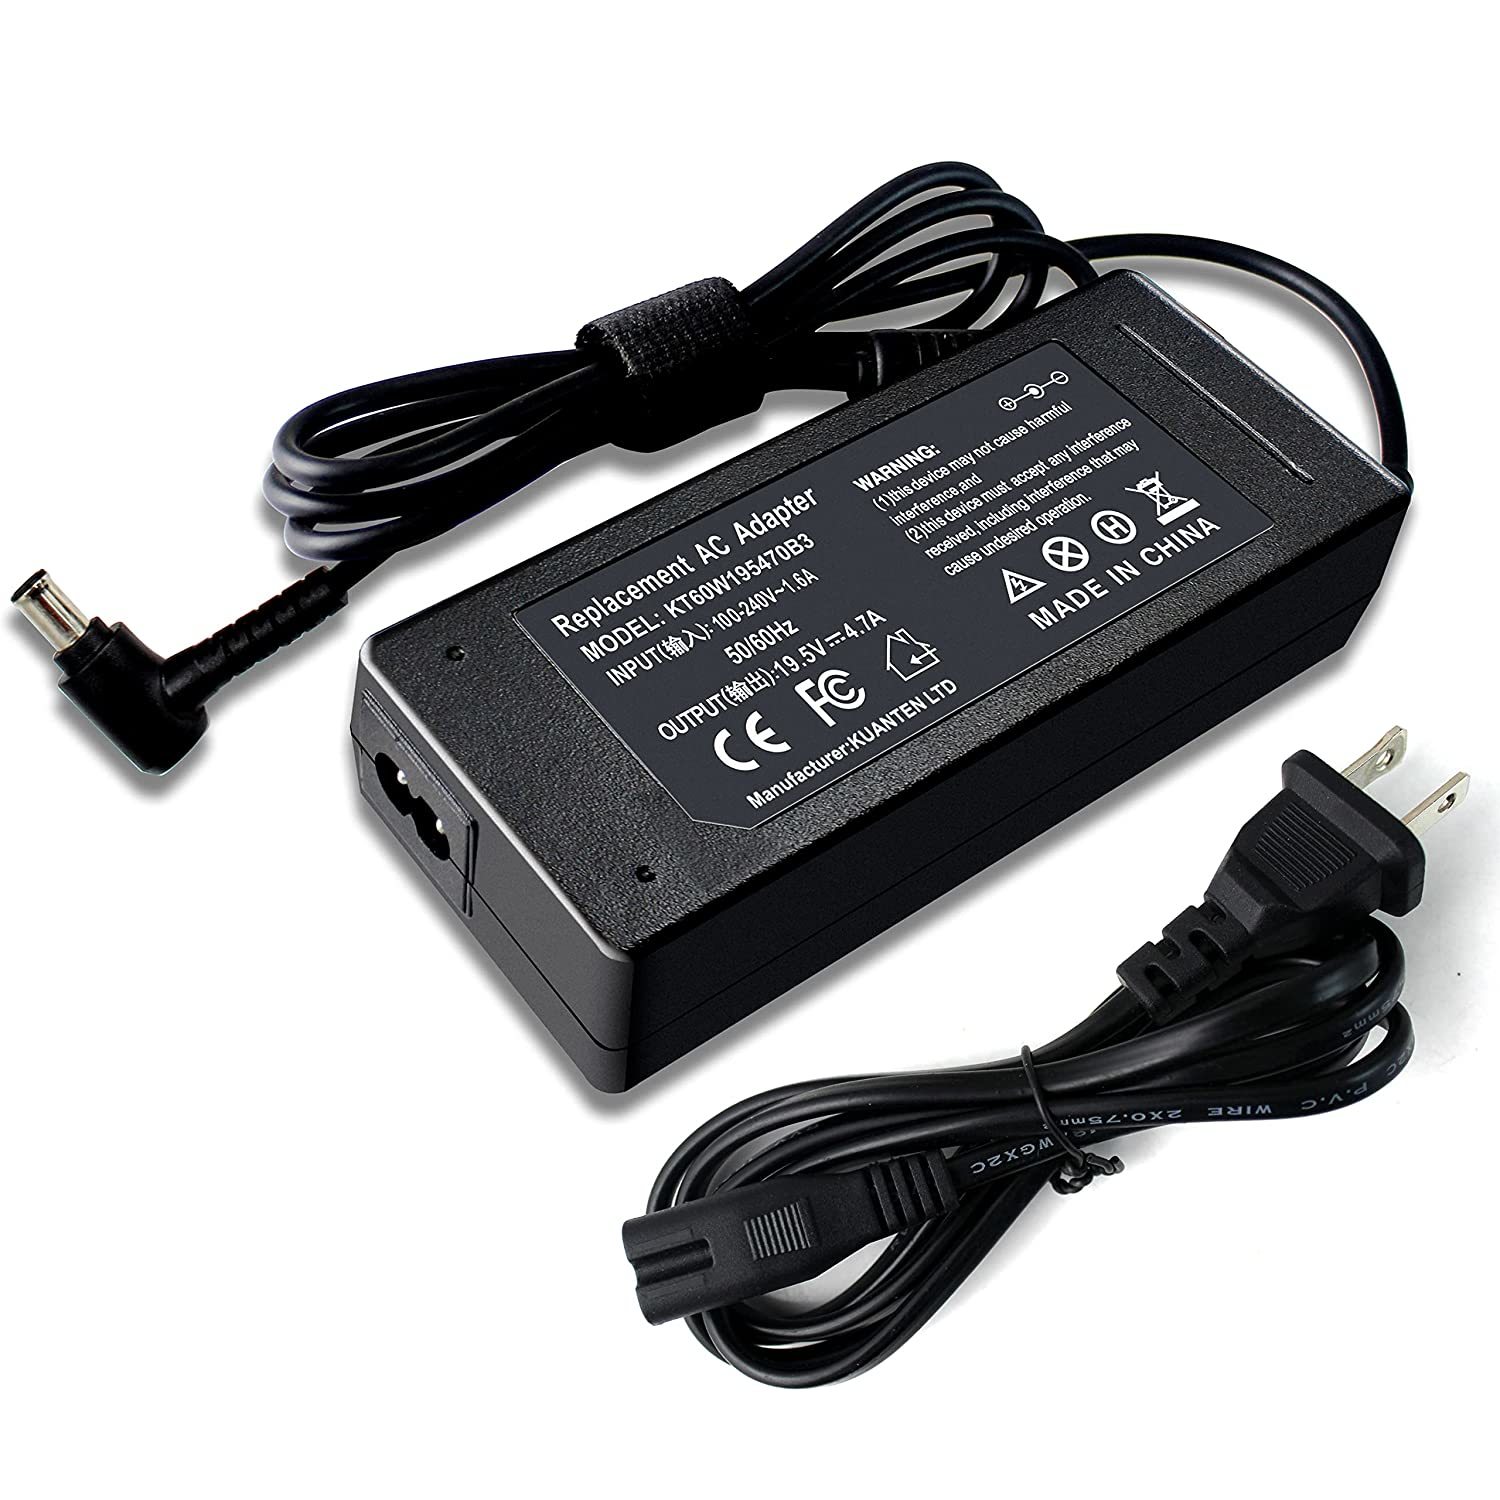 Primary image for Vgp-Ac19V48 Vgp-Ac19V37 Laptop Charger Compatible With Sony Vaio Pcg Vgn Vpc Vgp